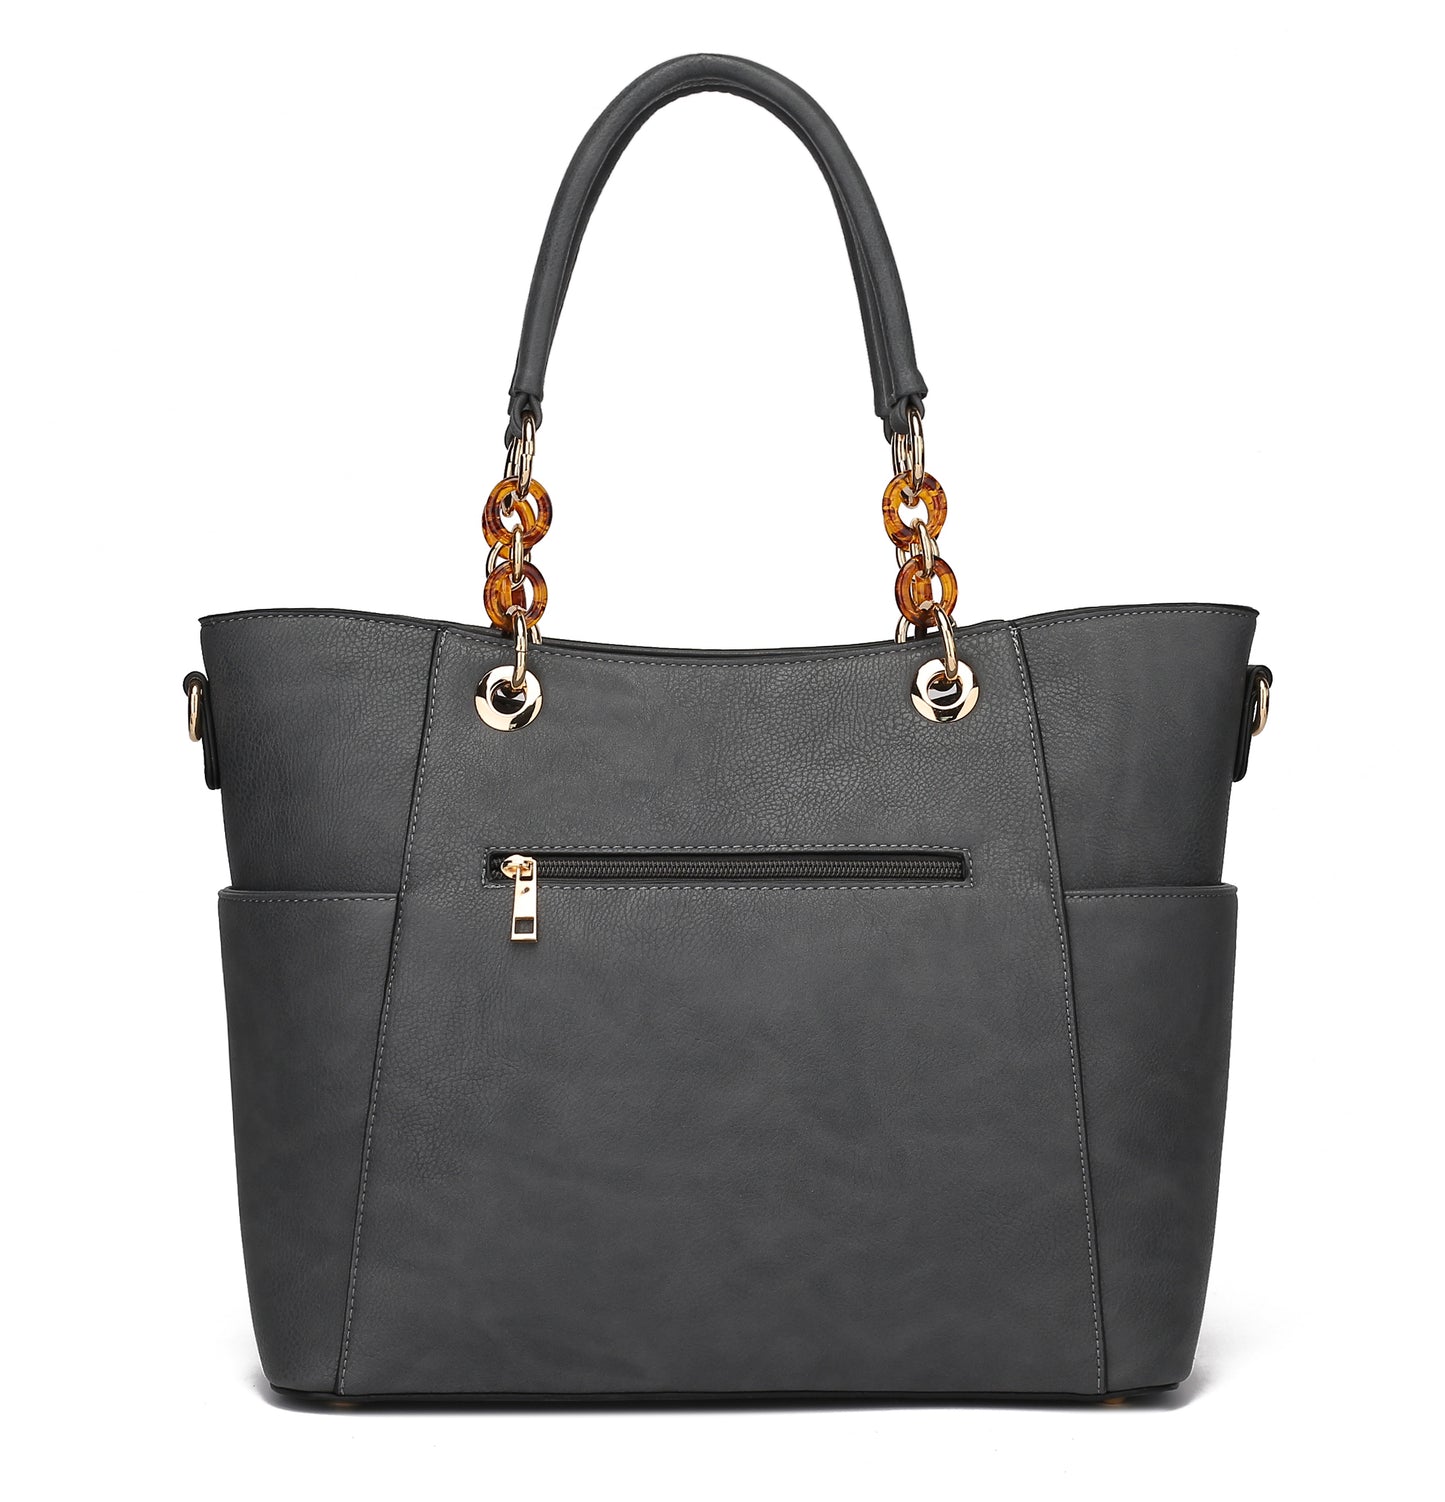 A Bonita Tote Handbag & Wallet Set Vegan Leather Women with a chain handle by Pink Orpheus.